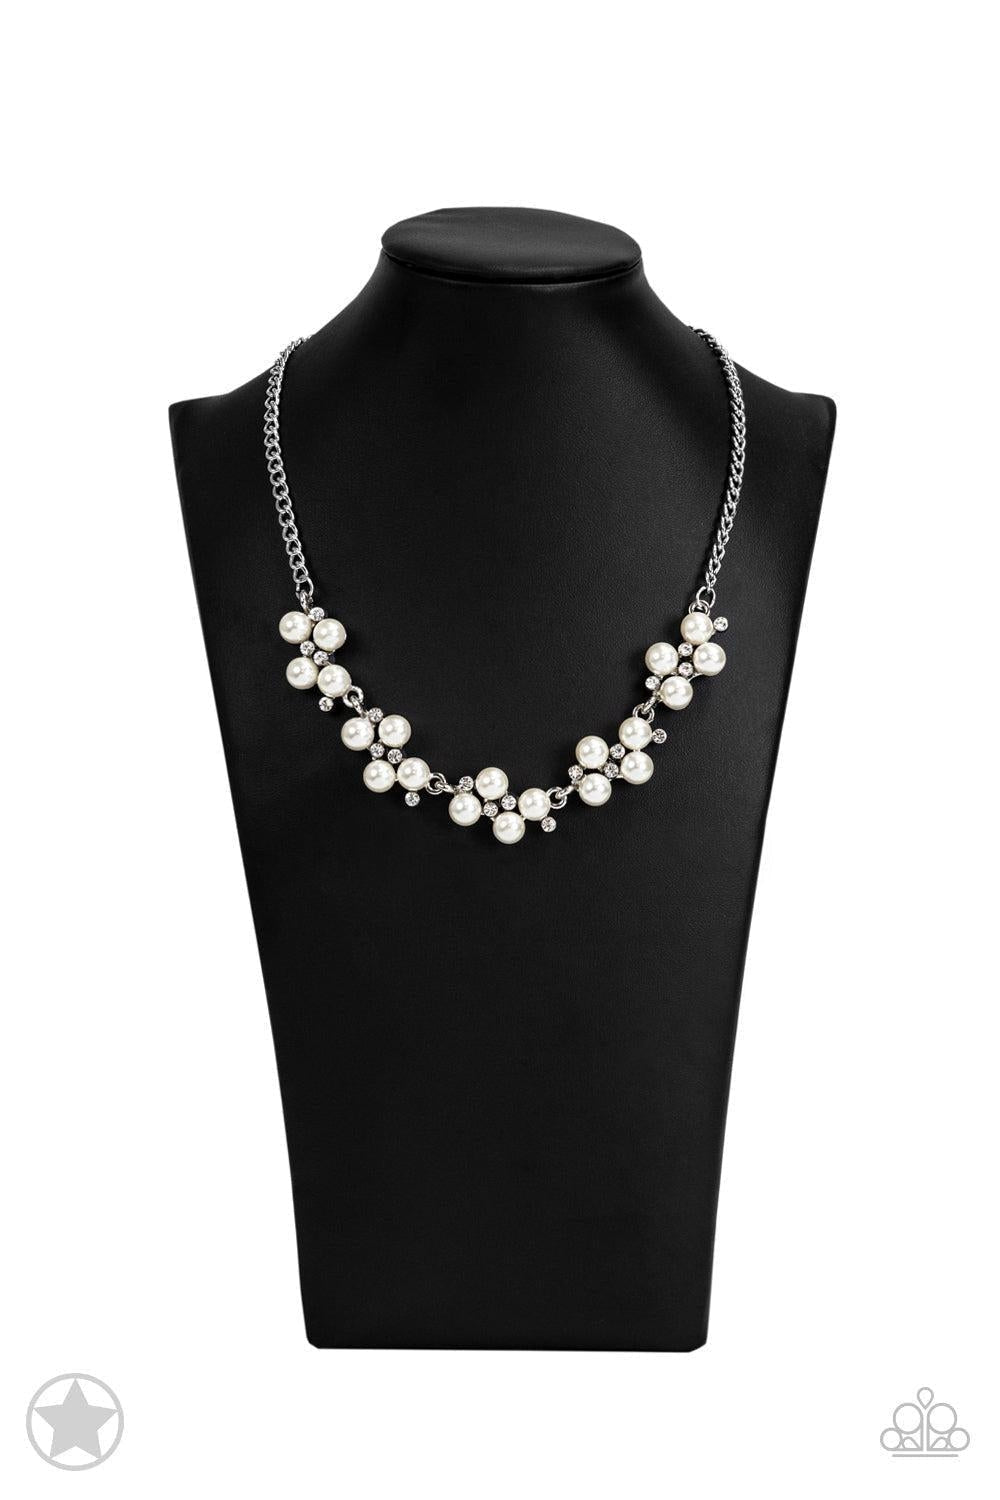 Paparazzi for Weddings and Formal Occasions-CarasShop.com - $5 Jewelry by Cara Jewels